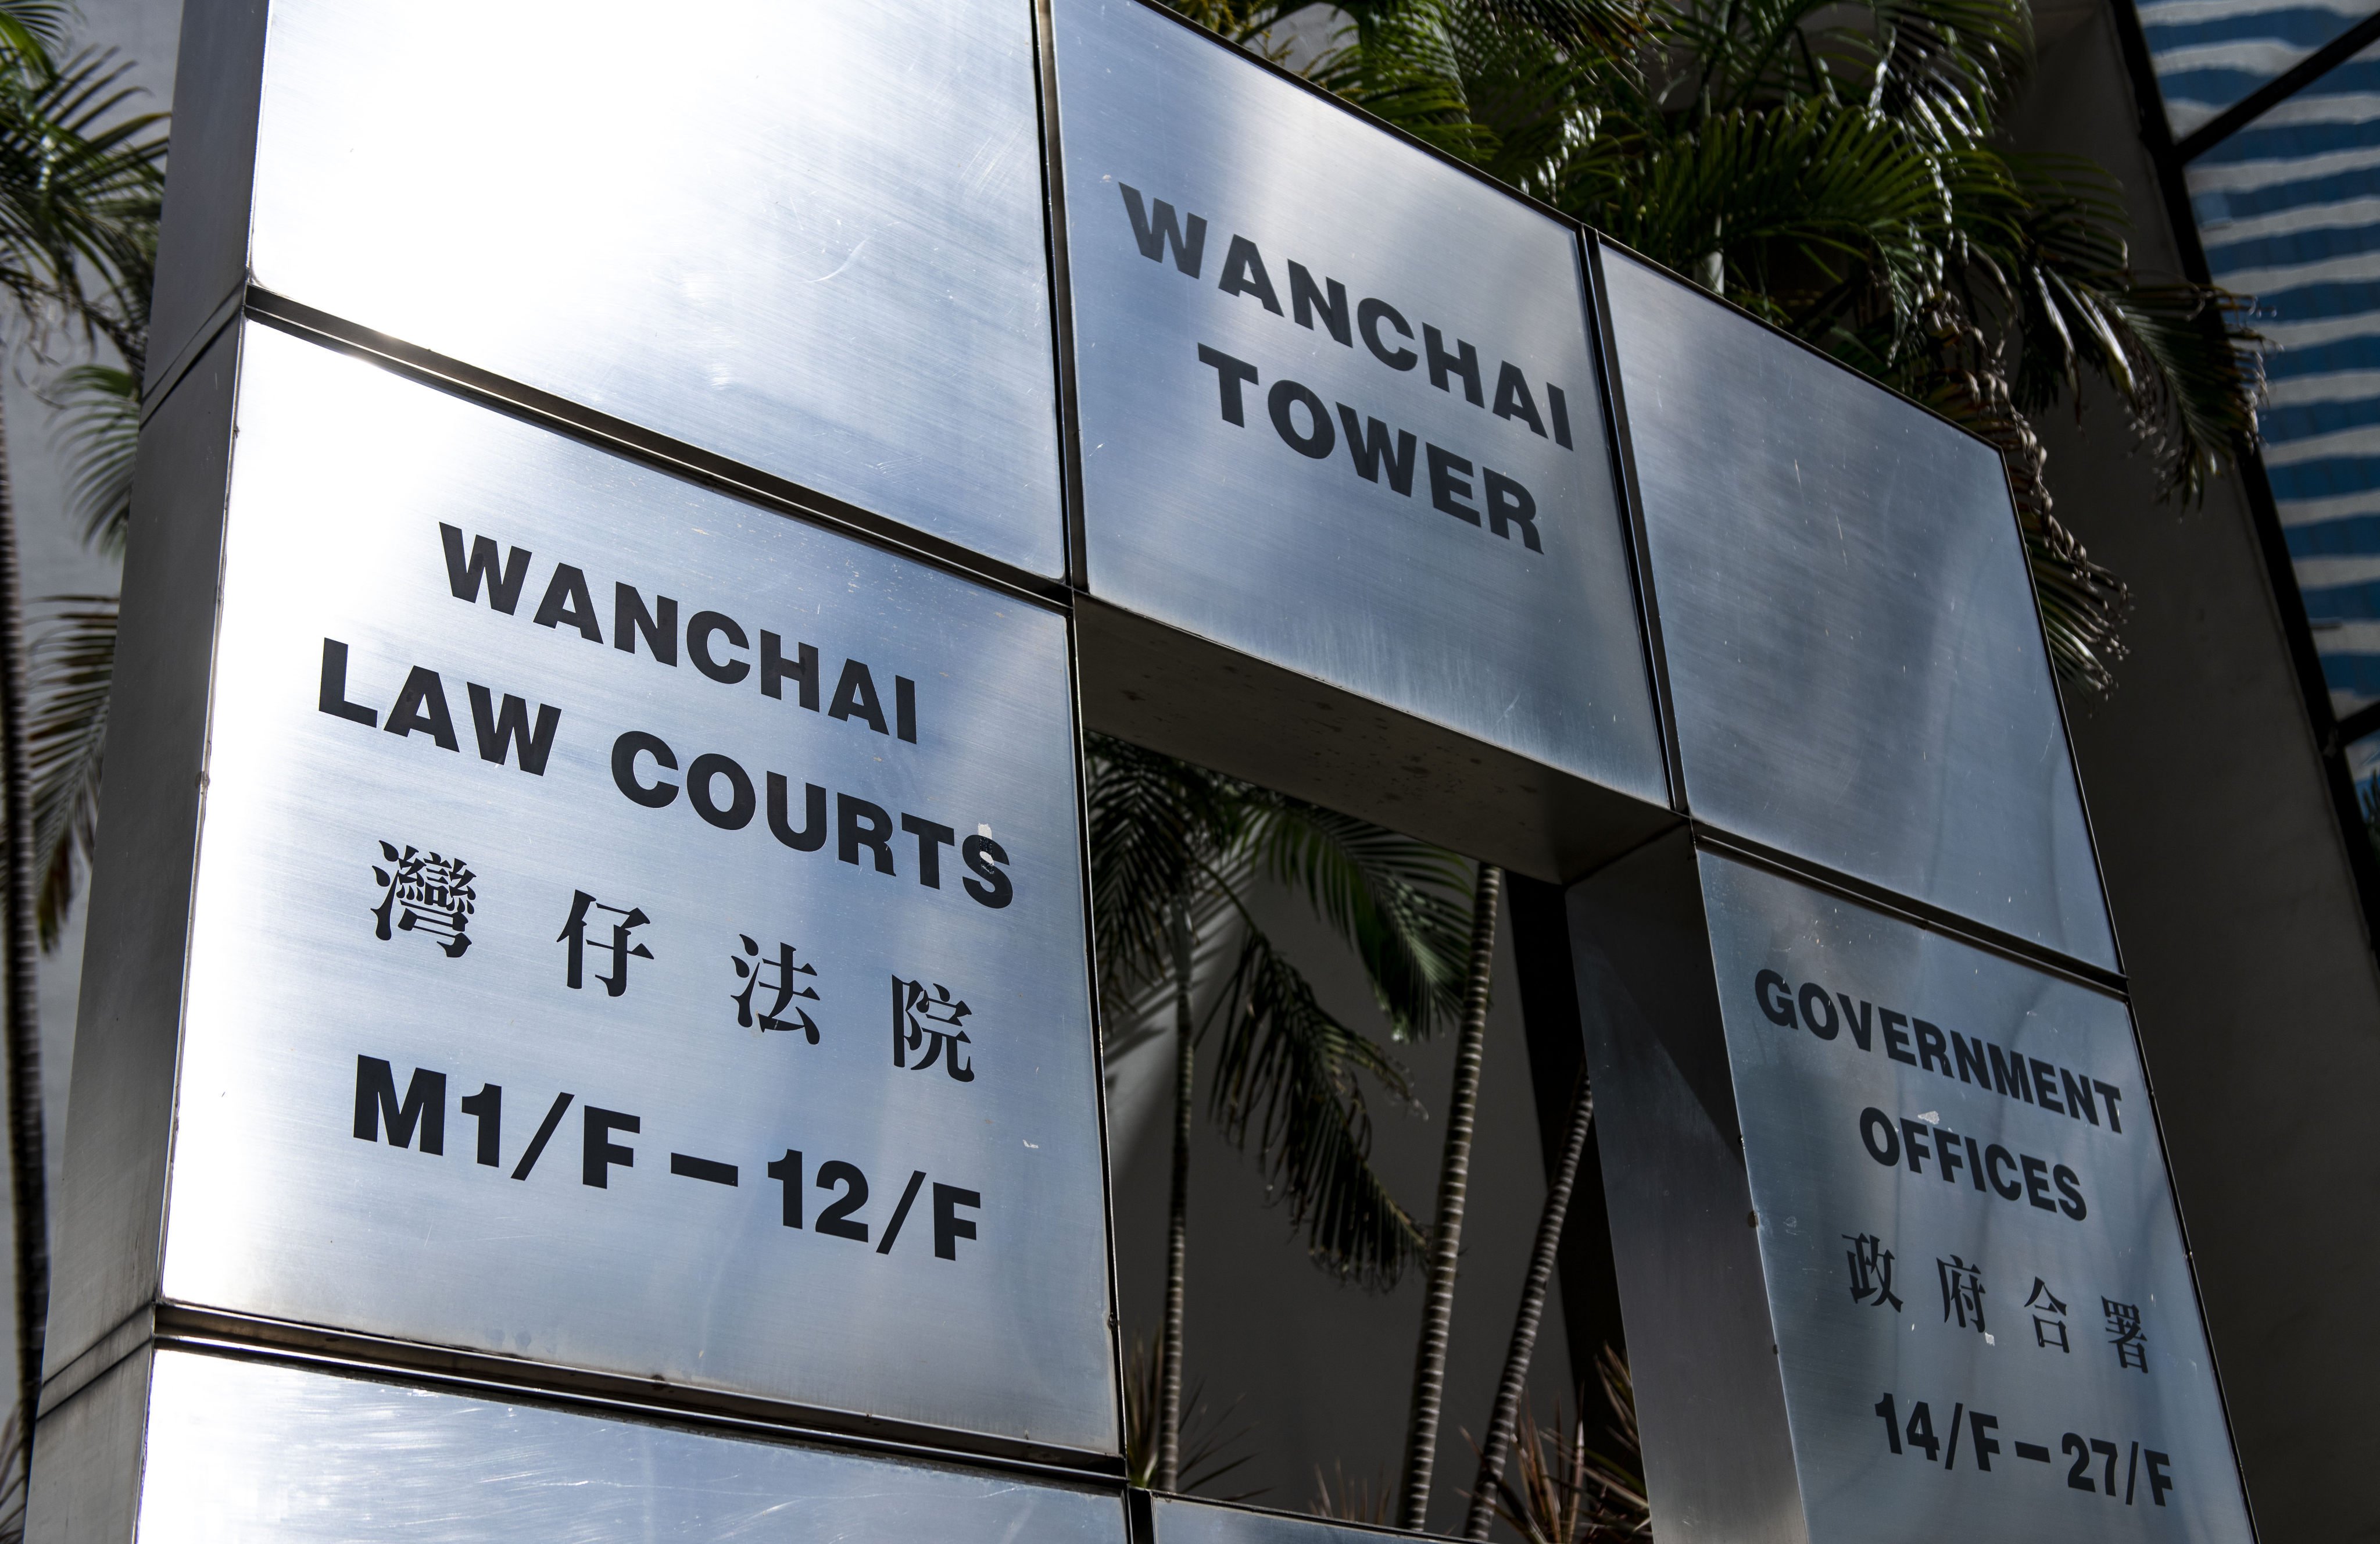 The District Court on Friday ruled against Francis William Haden in an equal opportunity action that shed light on the use of the Cantonese slang. Photo: Warton Li
